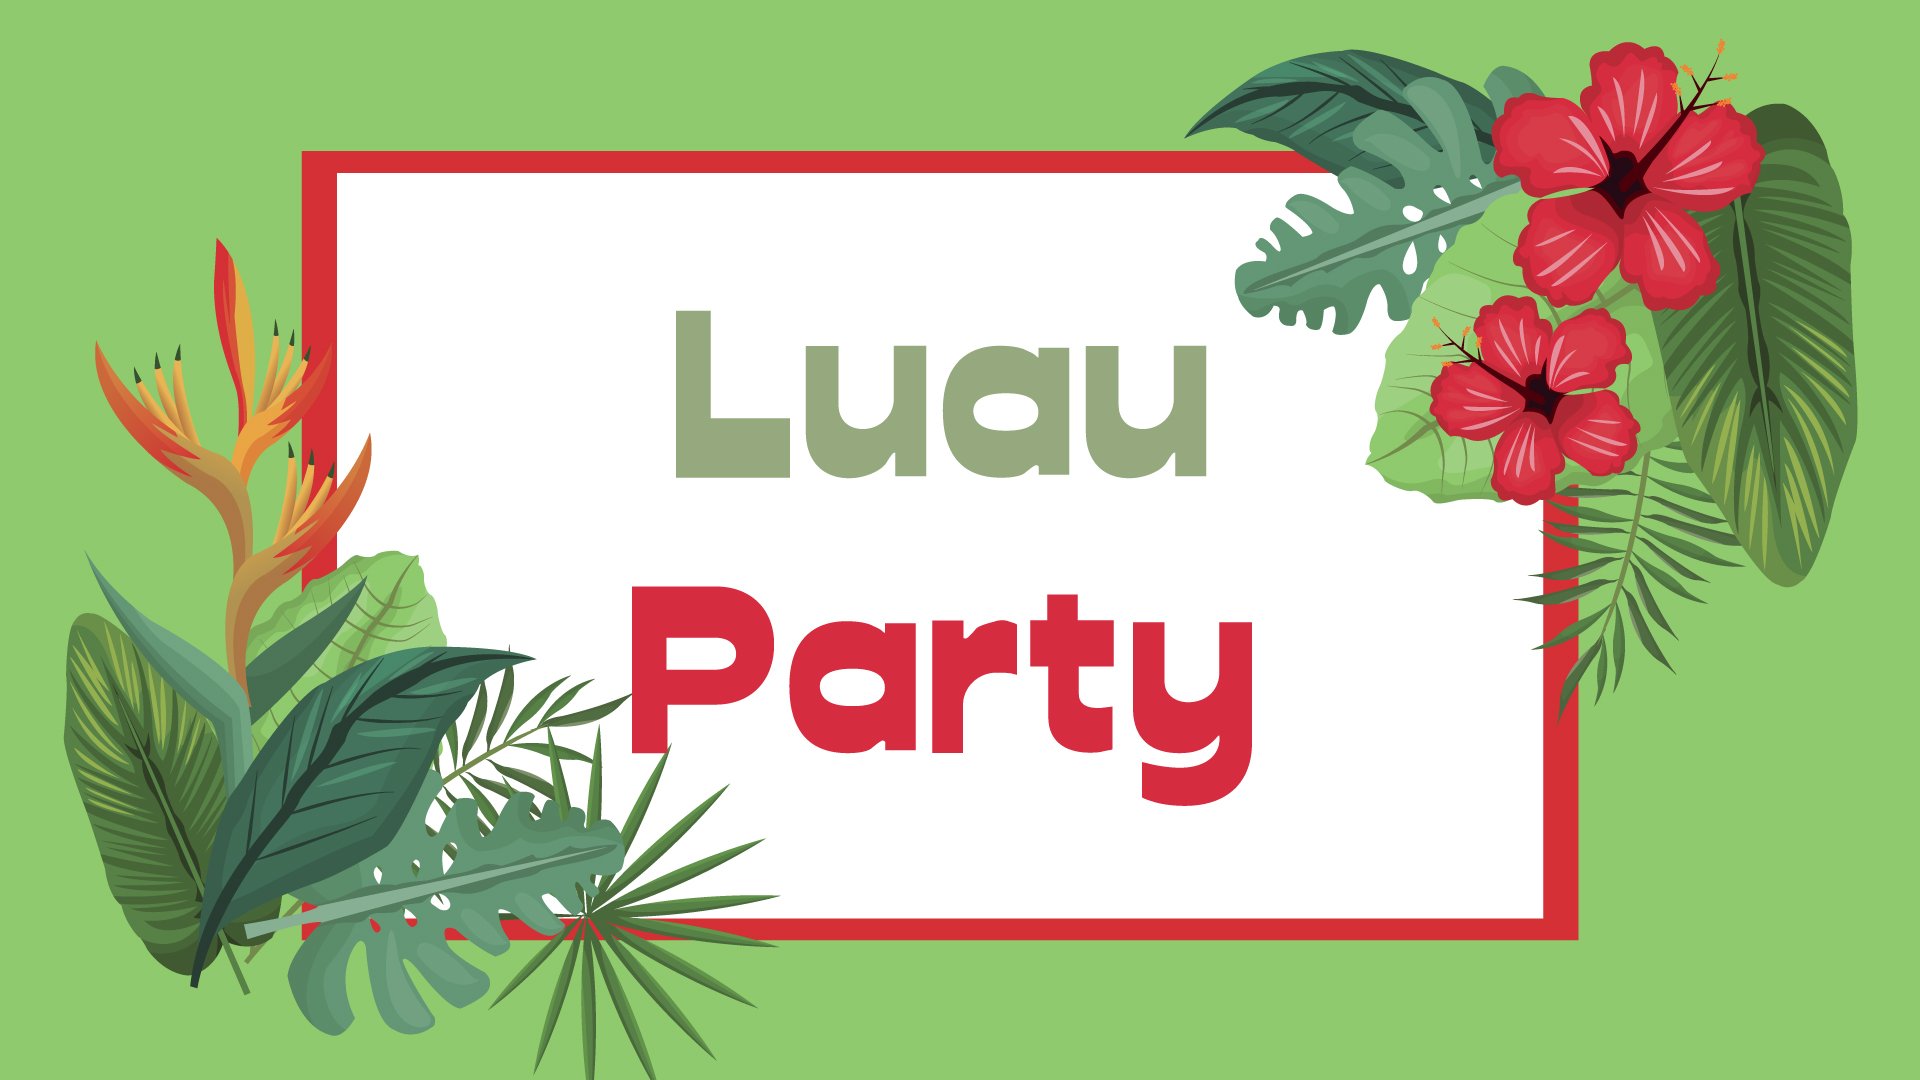 Luau Party event banner